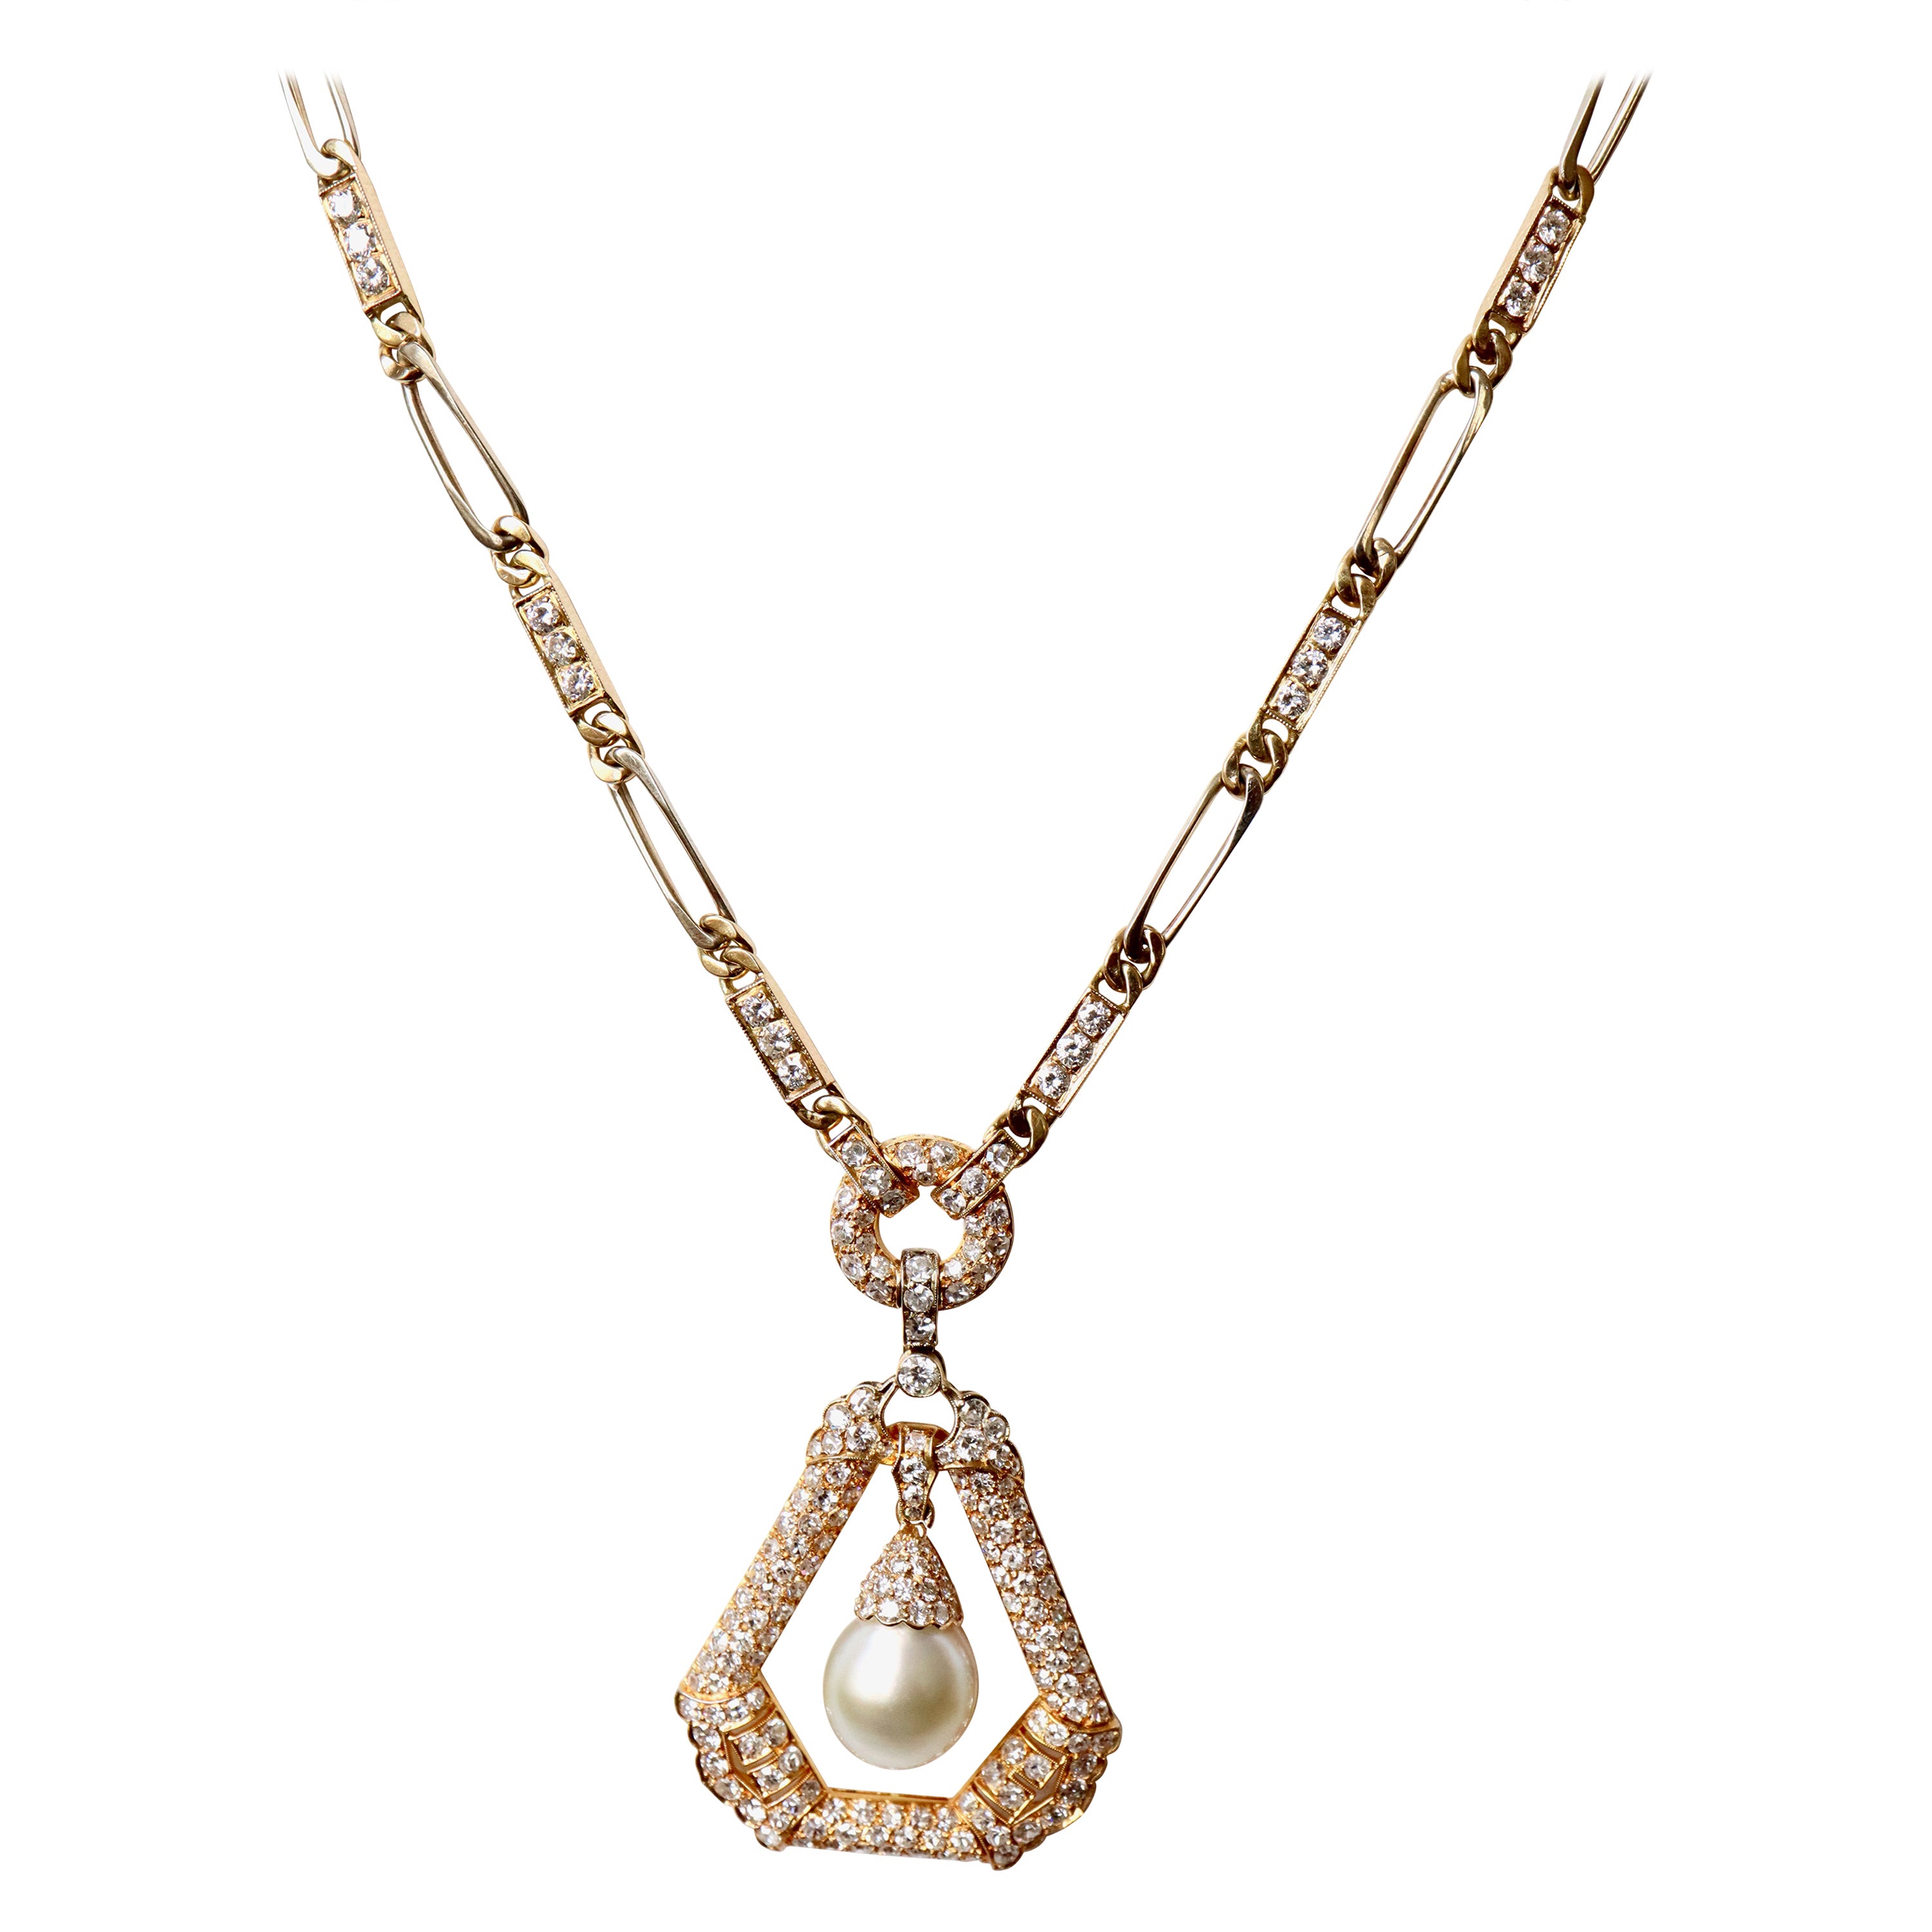 Large Pearl and Diamonds Pendant Necklace on 18 Karat Gold